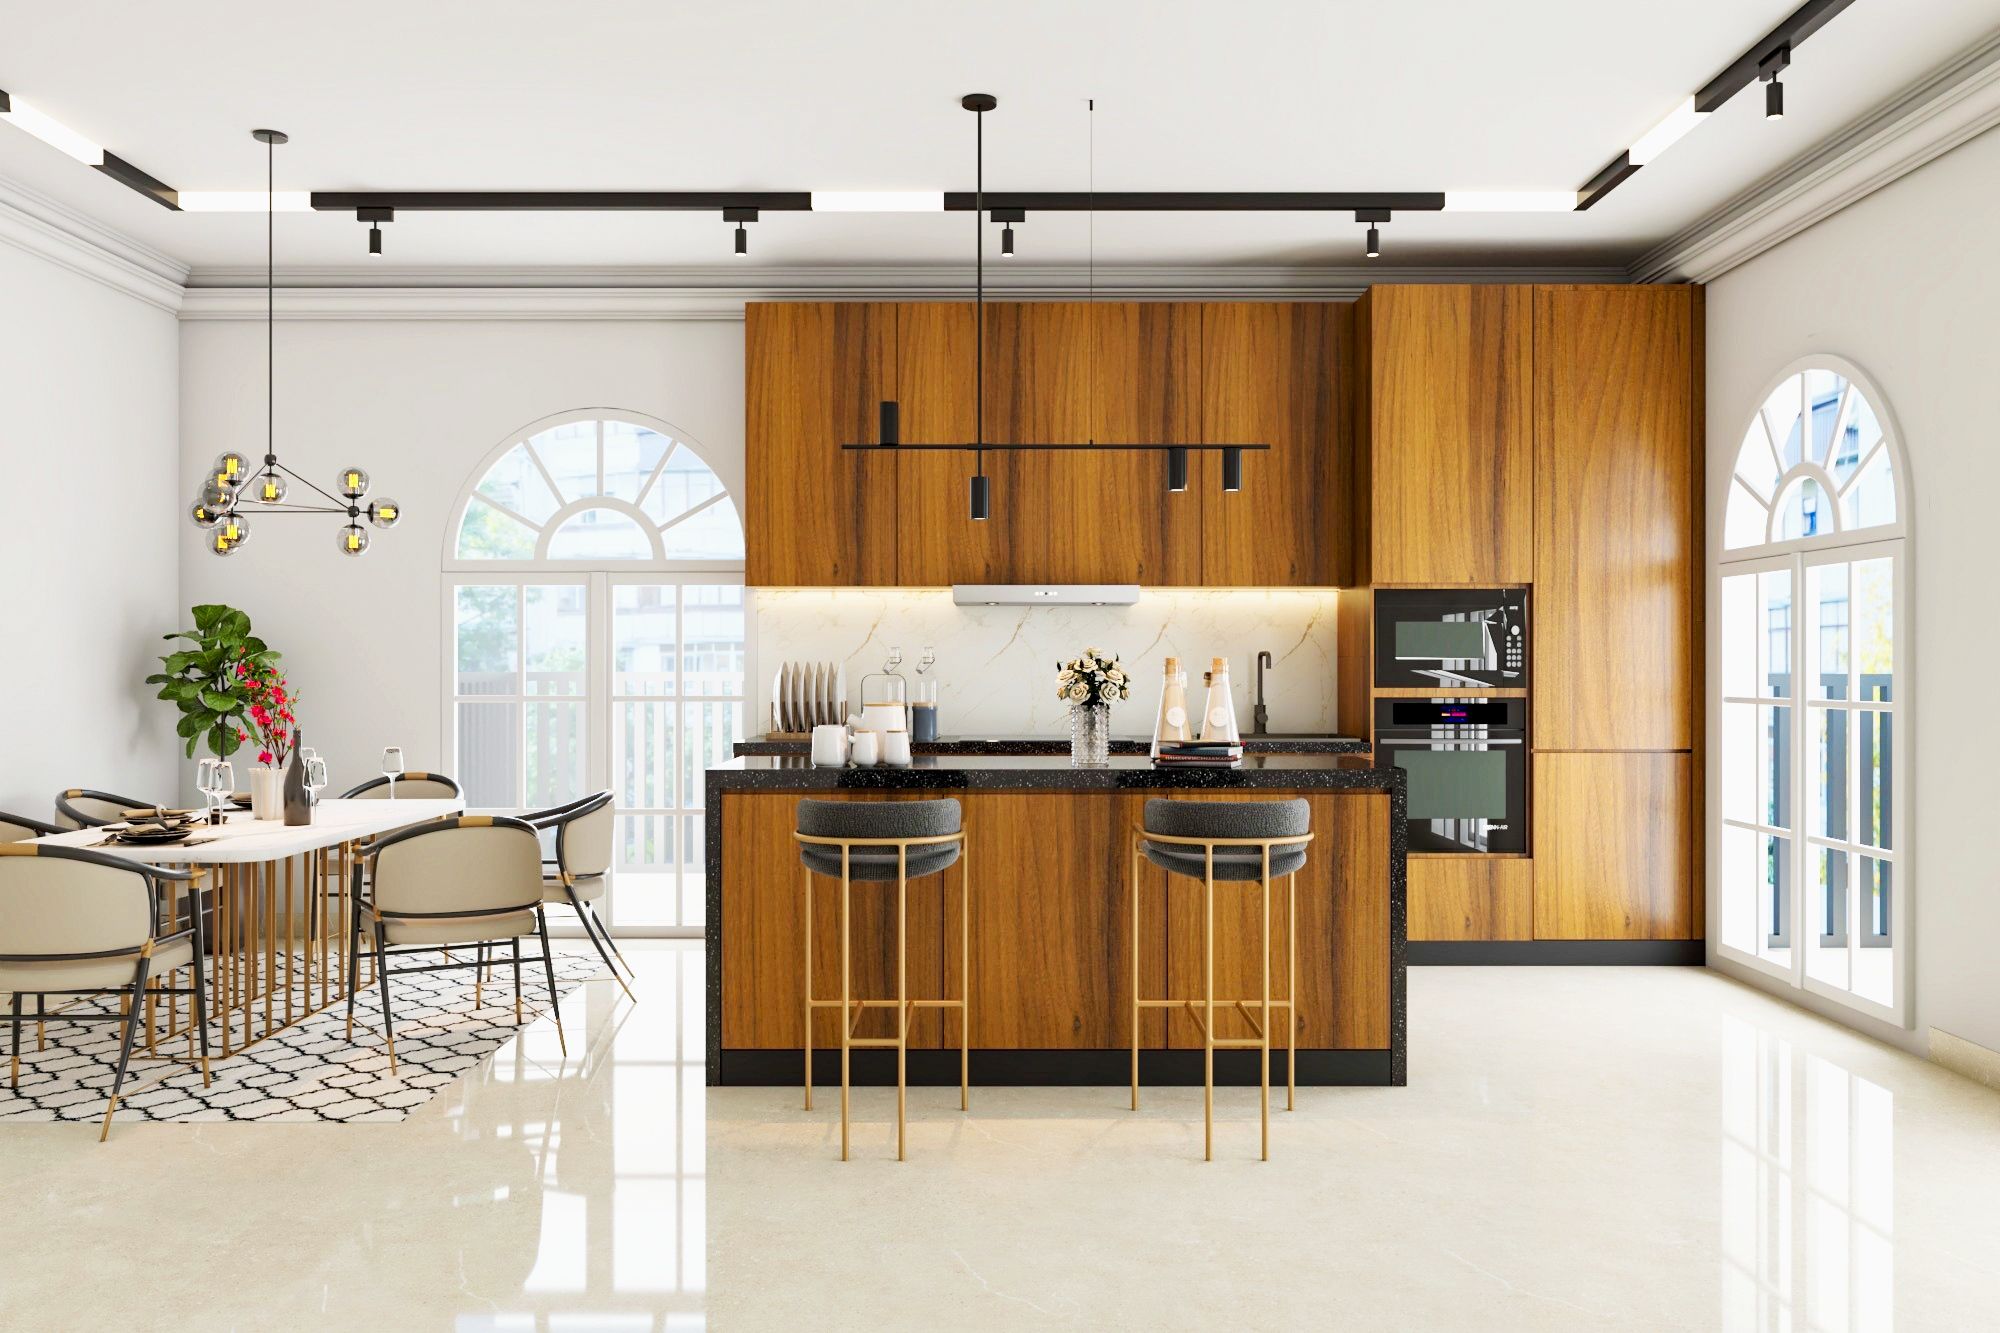 Contemporary Modular Roma Marrone Island Kitchen Design With Black Upholstered Bar Stools